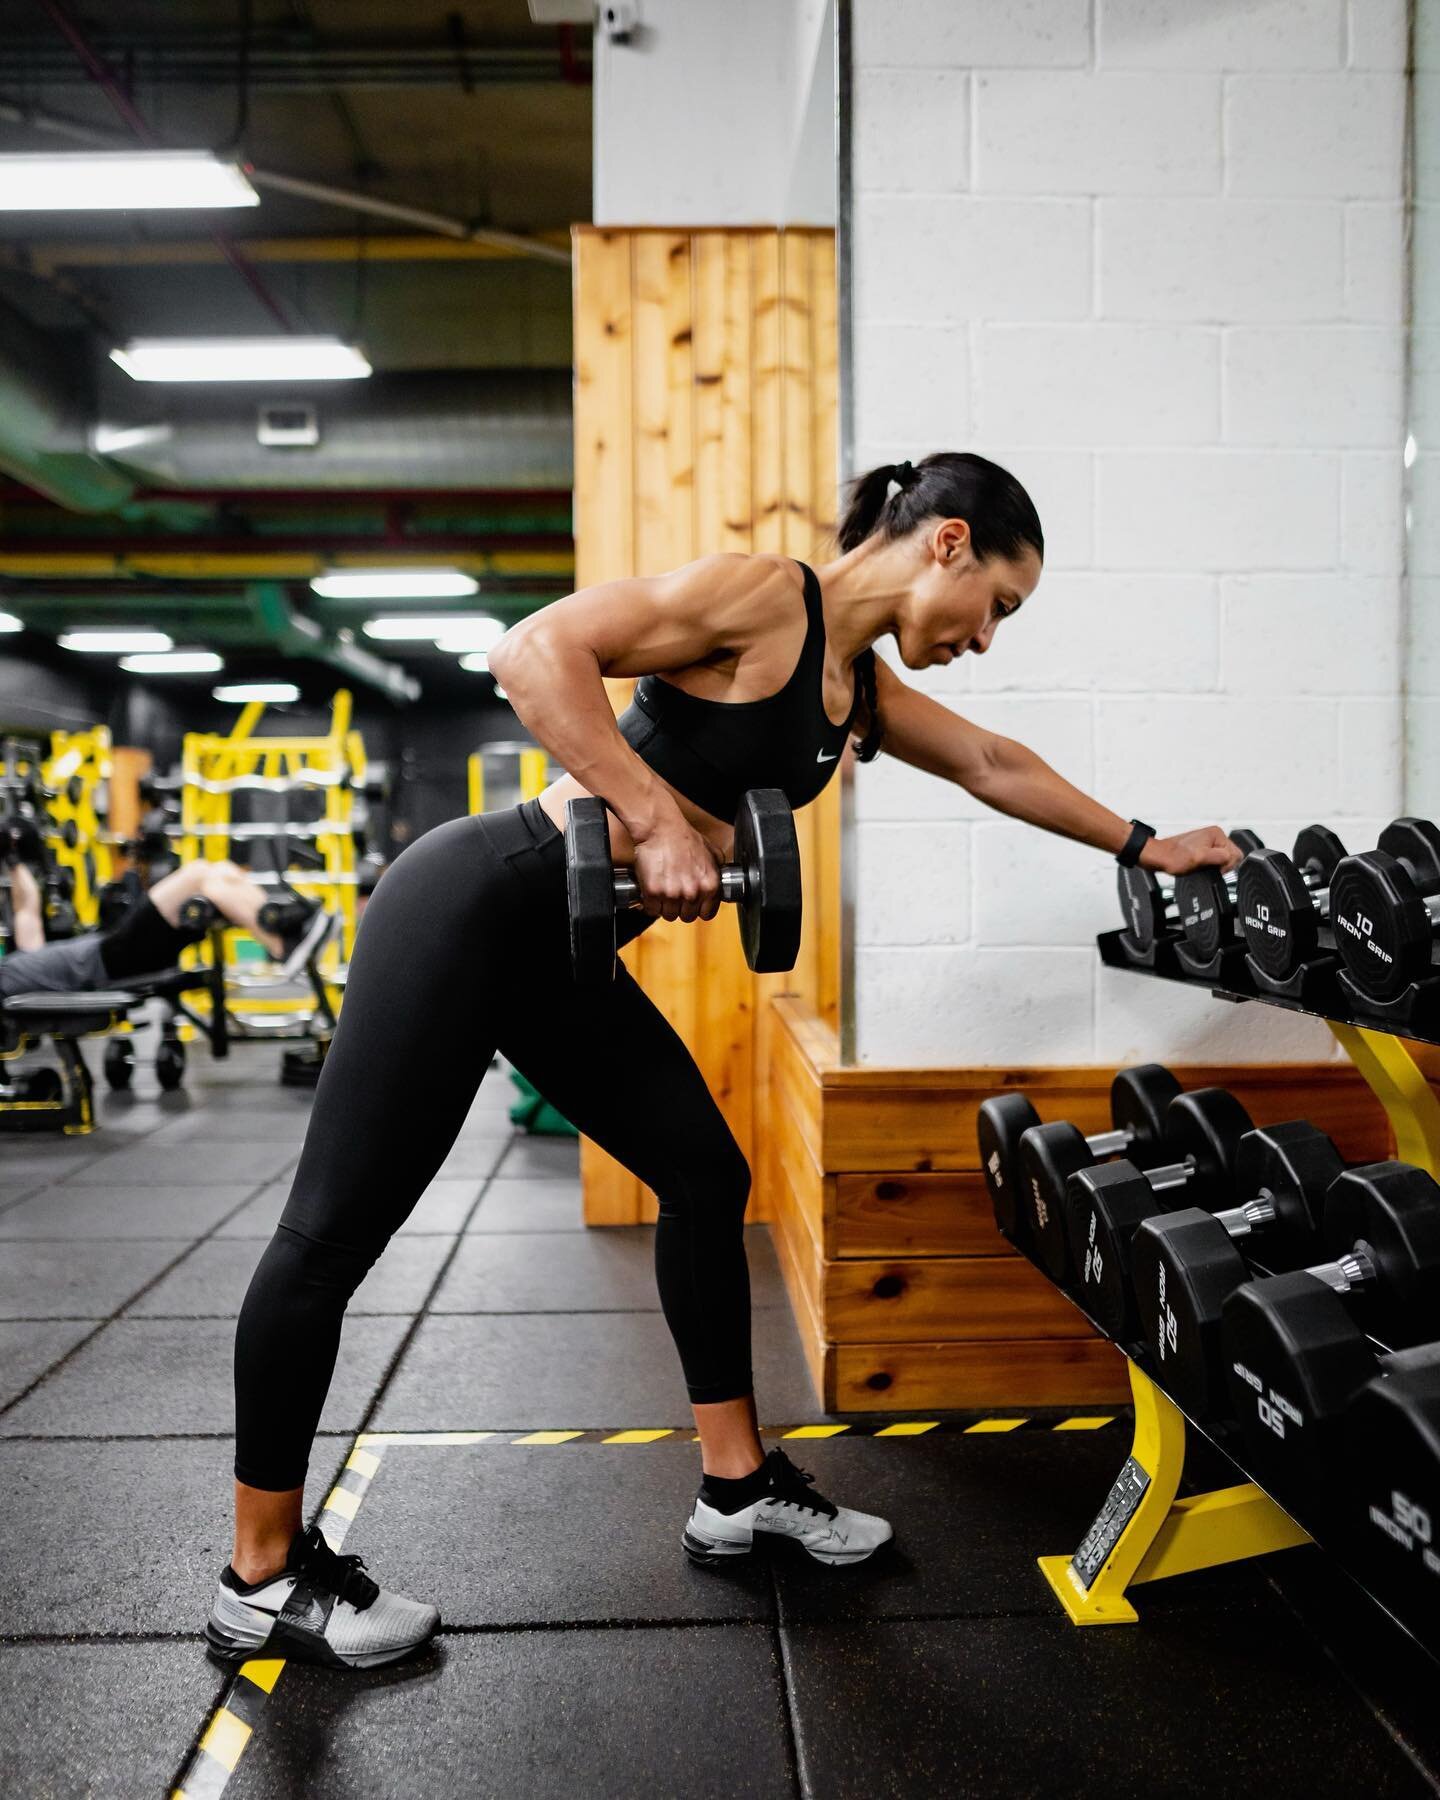 Age is just a number when it comes to physical strength. Women over 40 are proof that strength and determination only grow stronger with time. Embrace your power and keep pushing your limits, because you are capable of achieving anything you set your